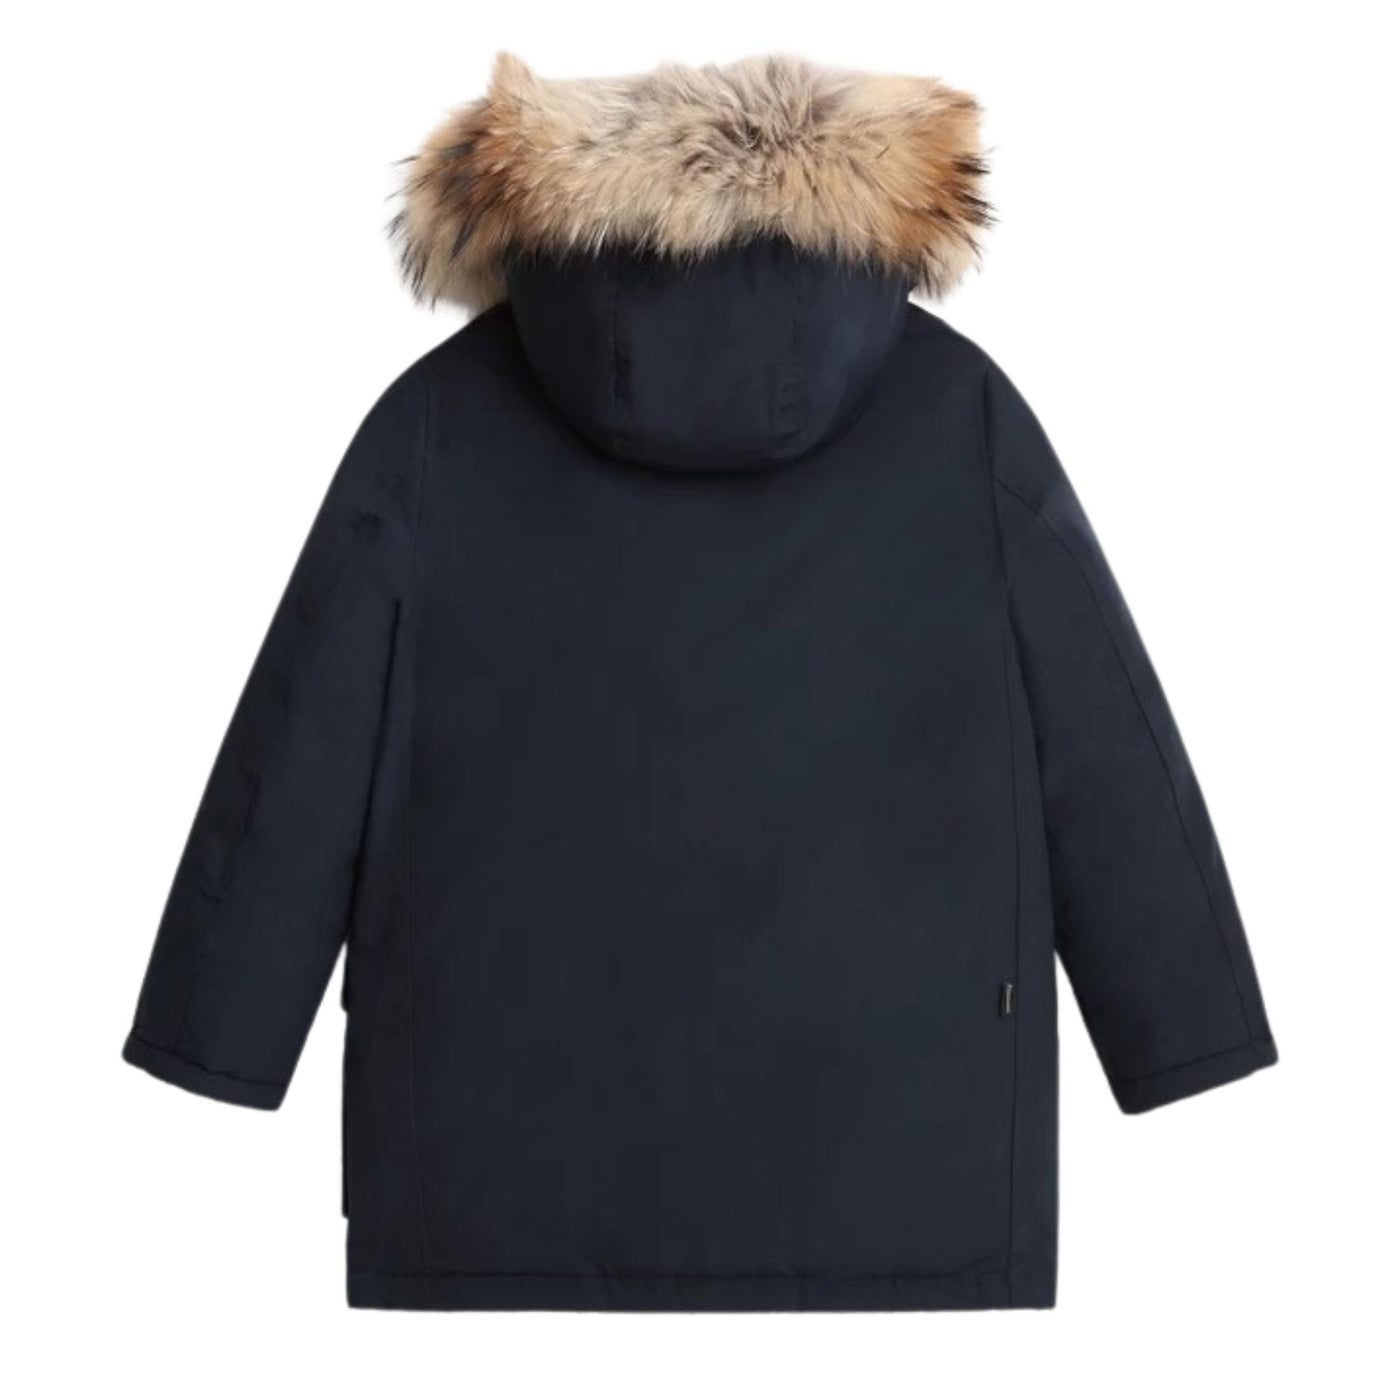 Children's jacket with removable fur